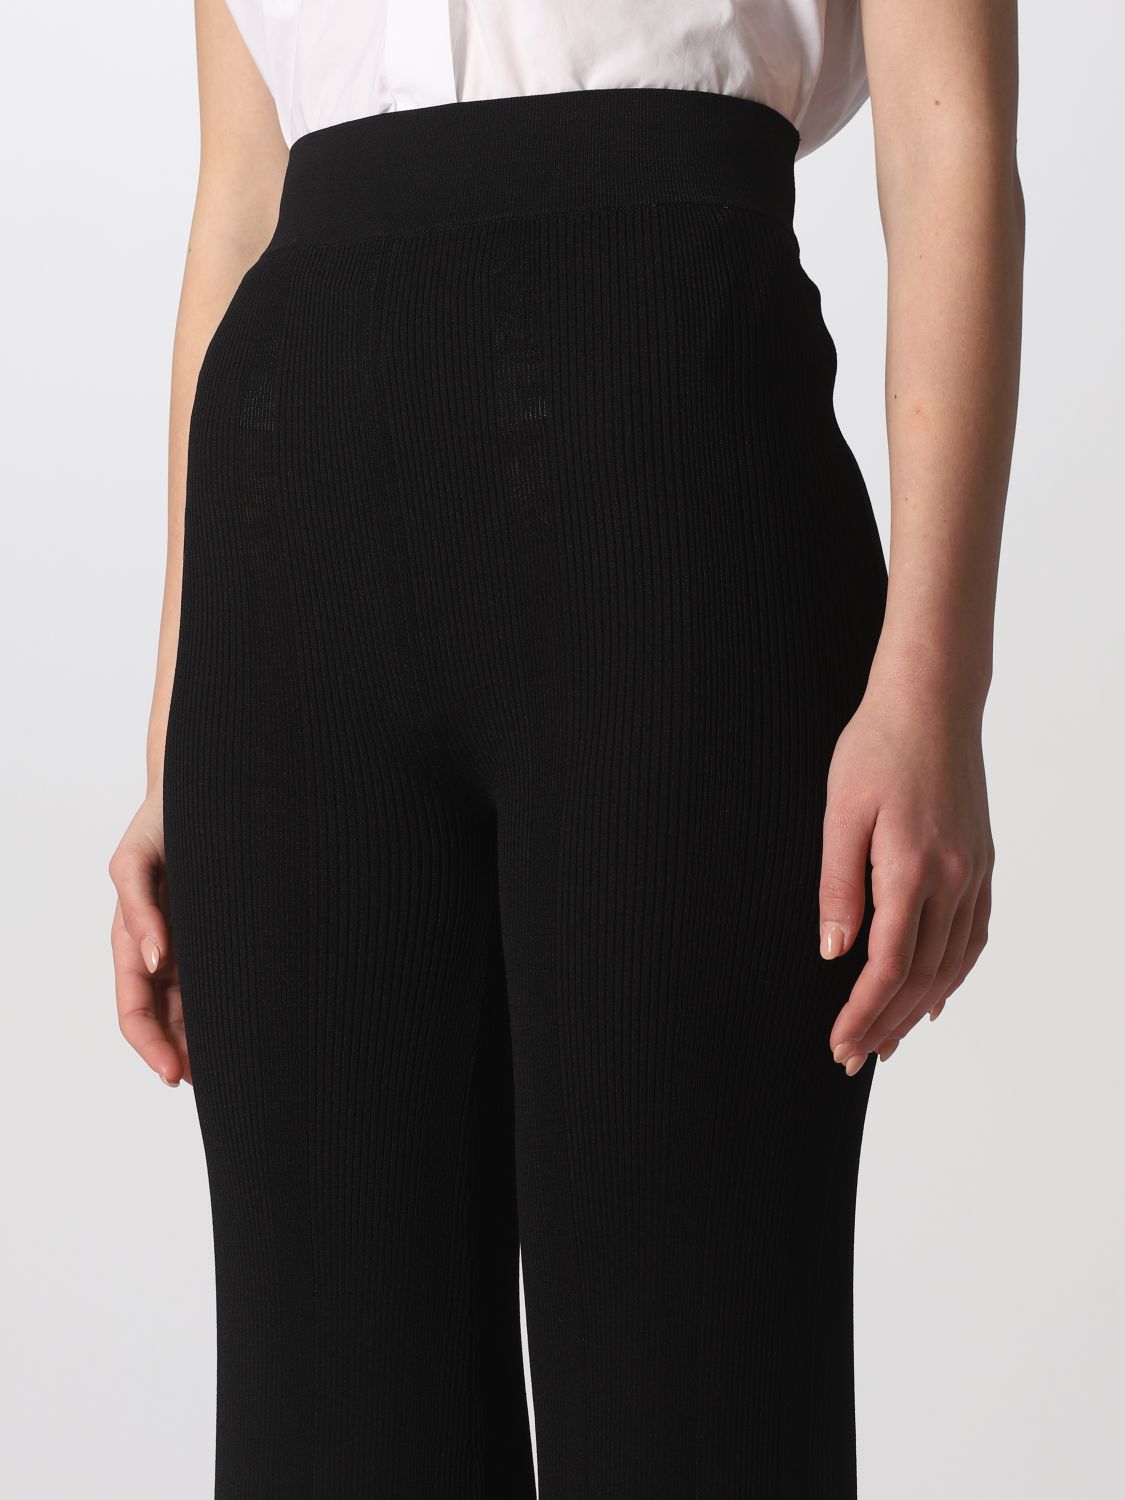 Trousers Remain: Remain trousers for women black 3